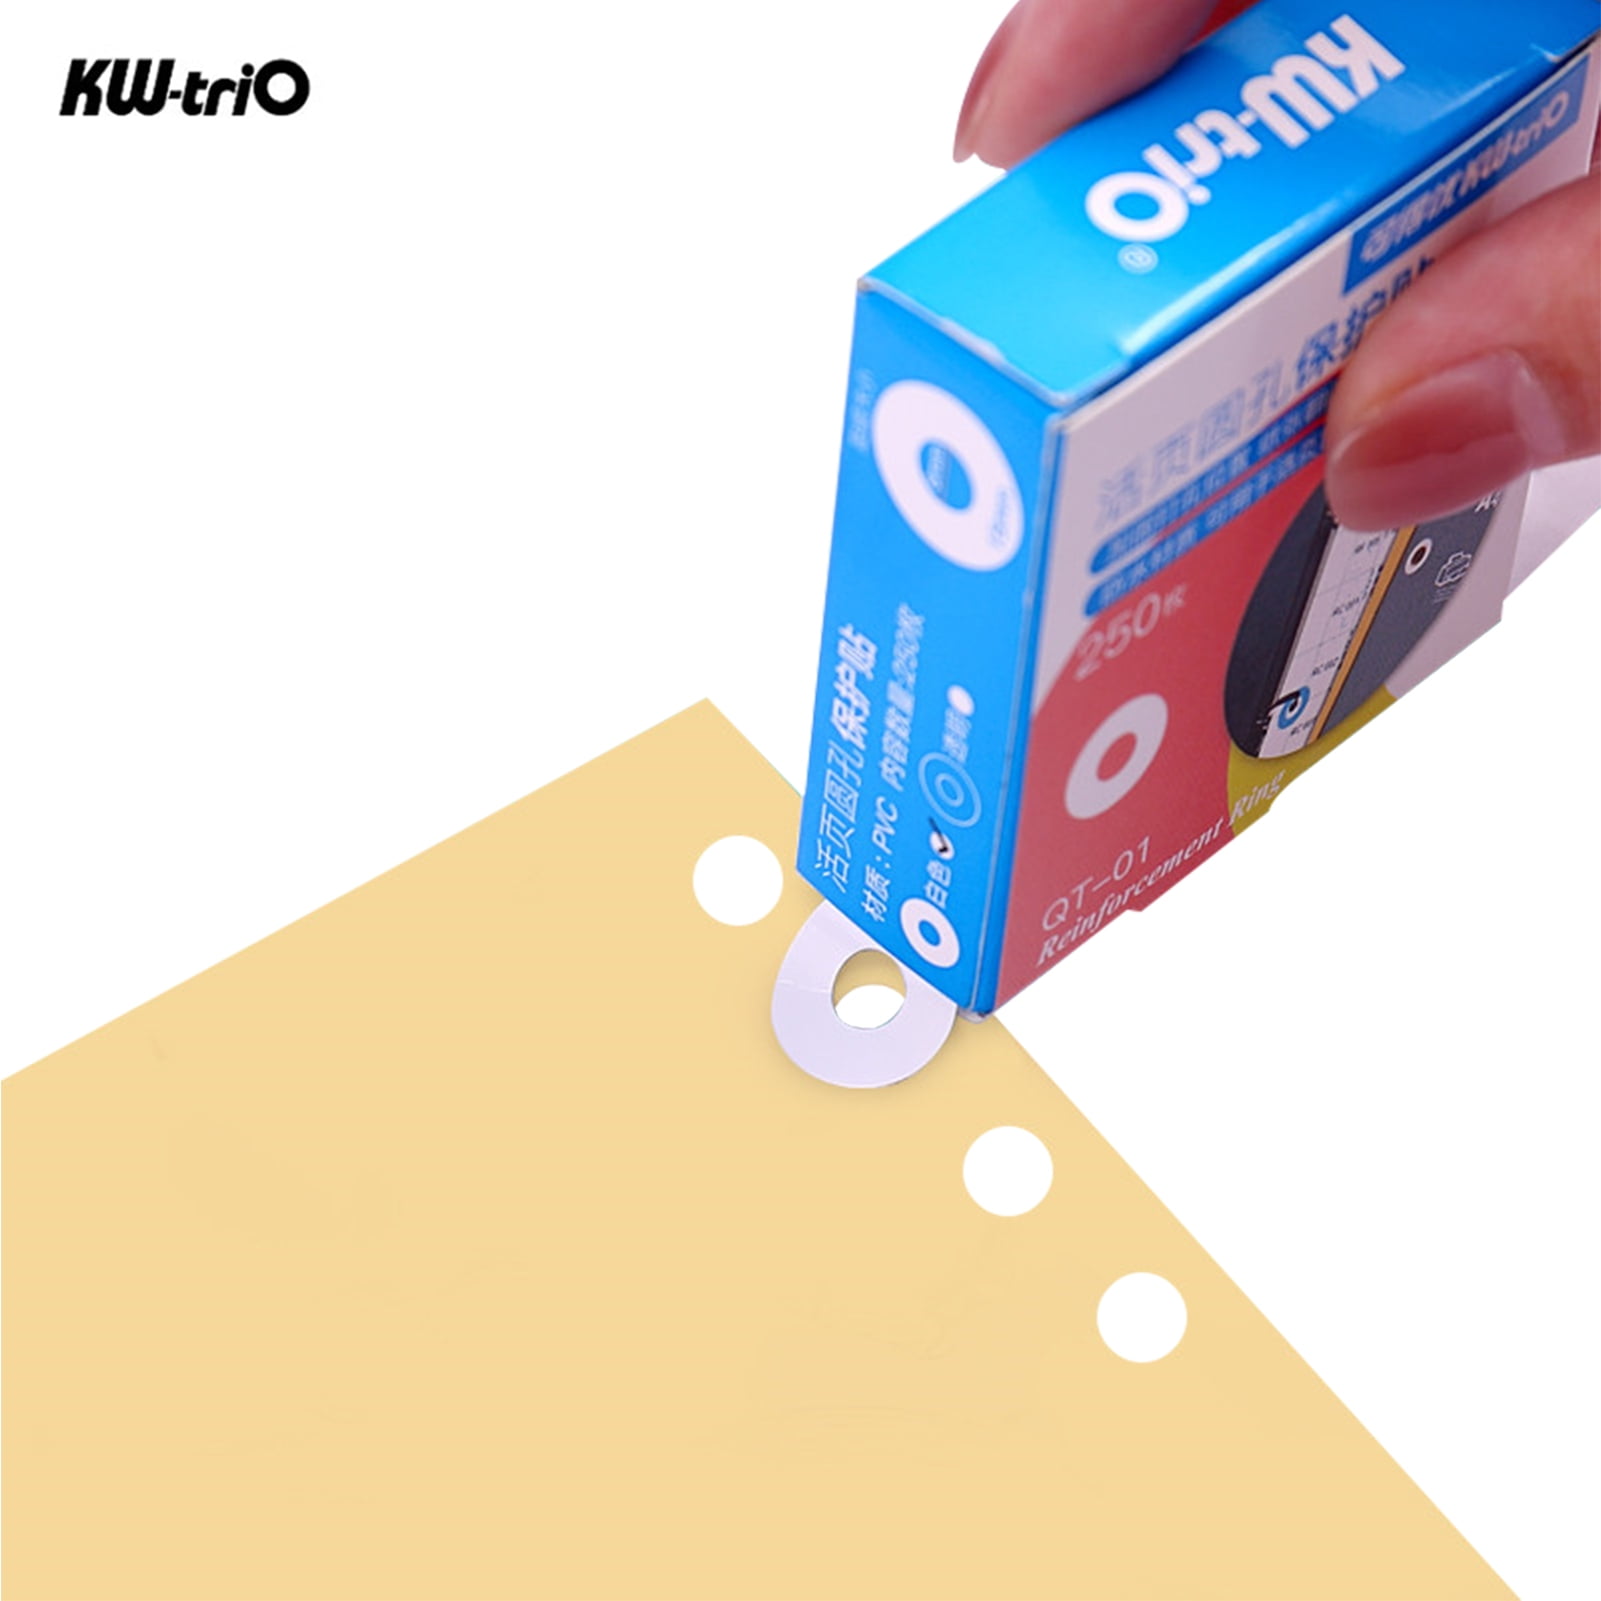 16 Sheets of Hole Reinforcement Stickers Binder Paper Hole Ring